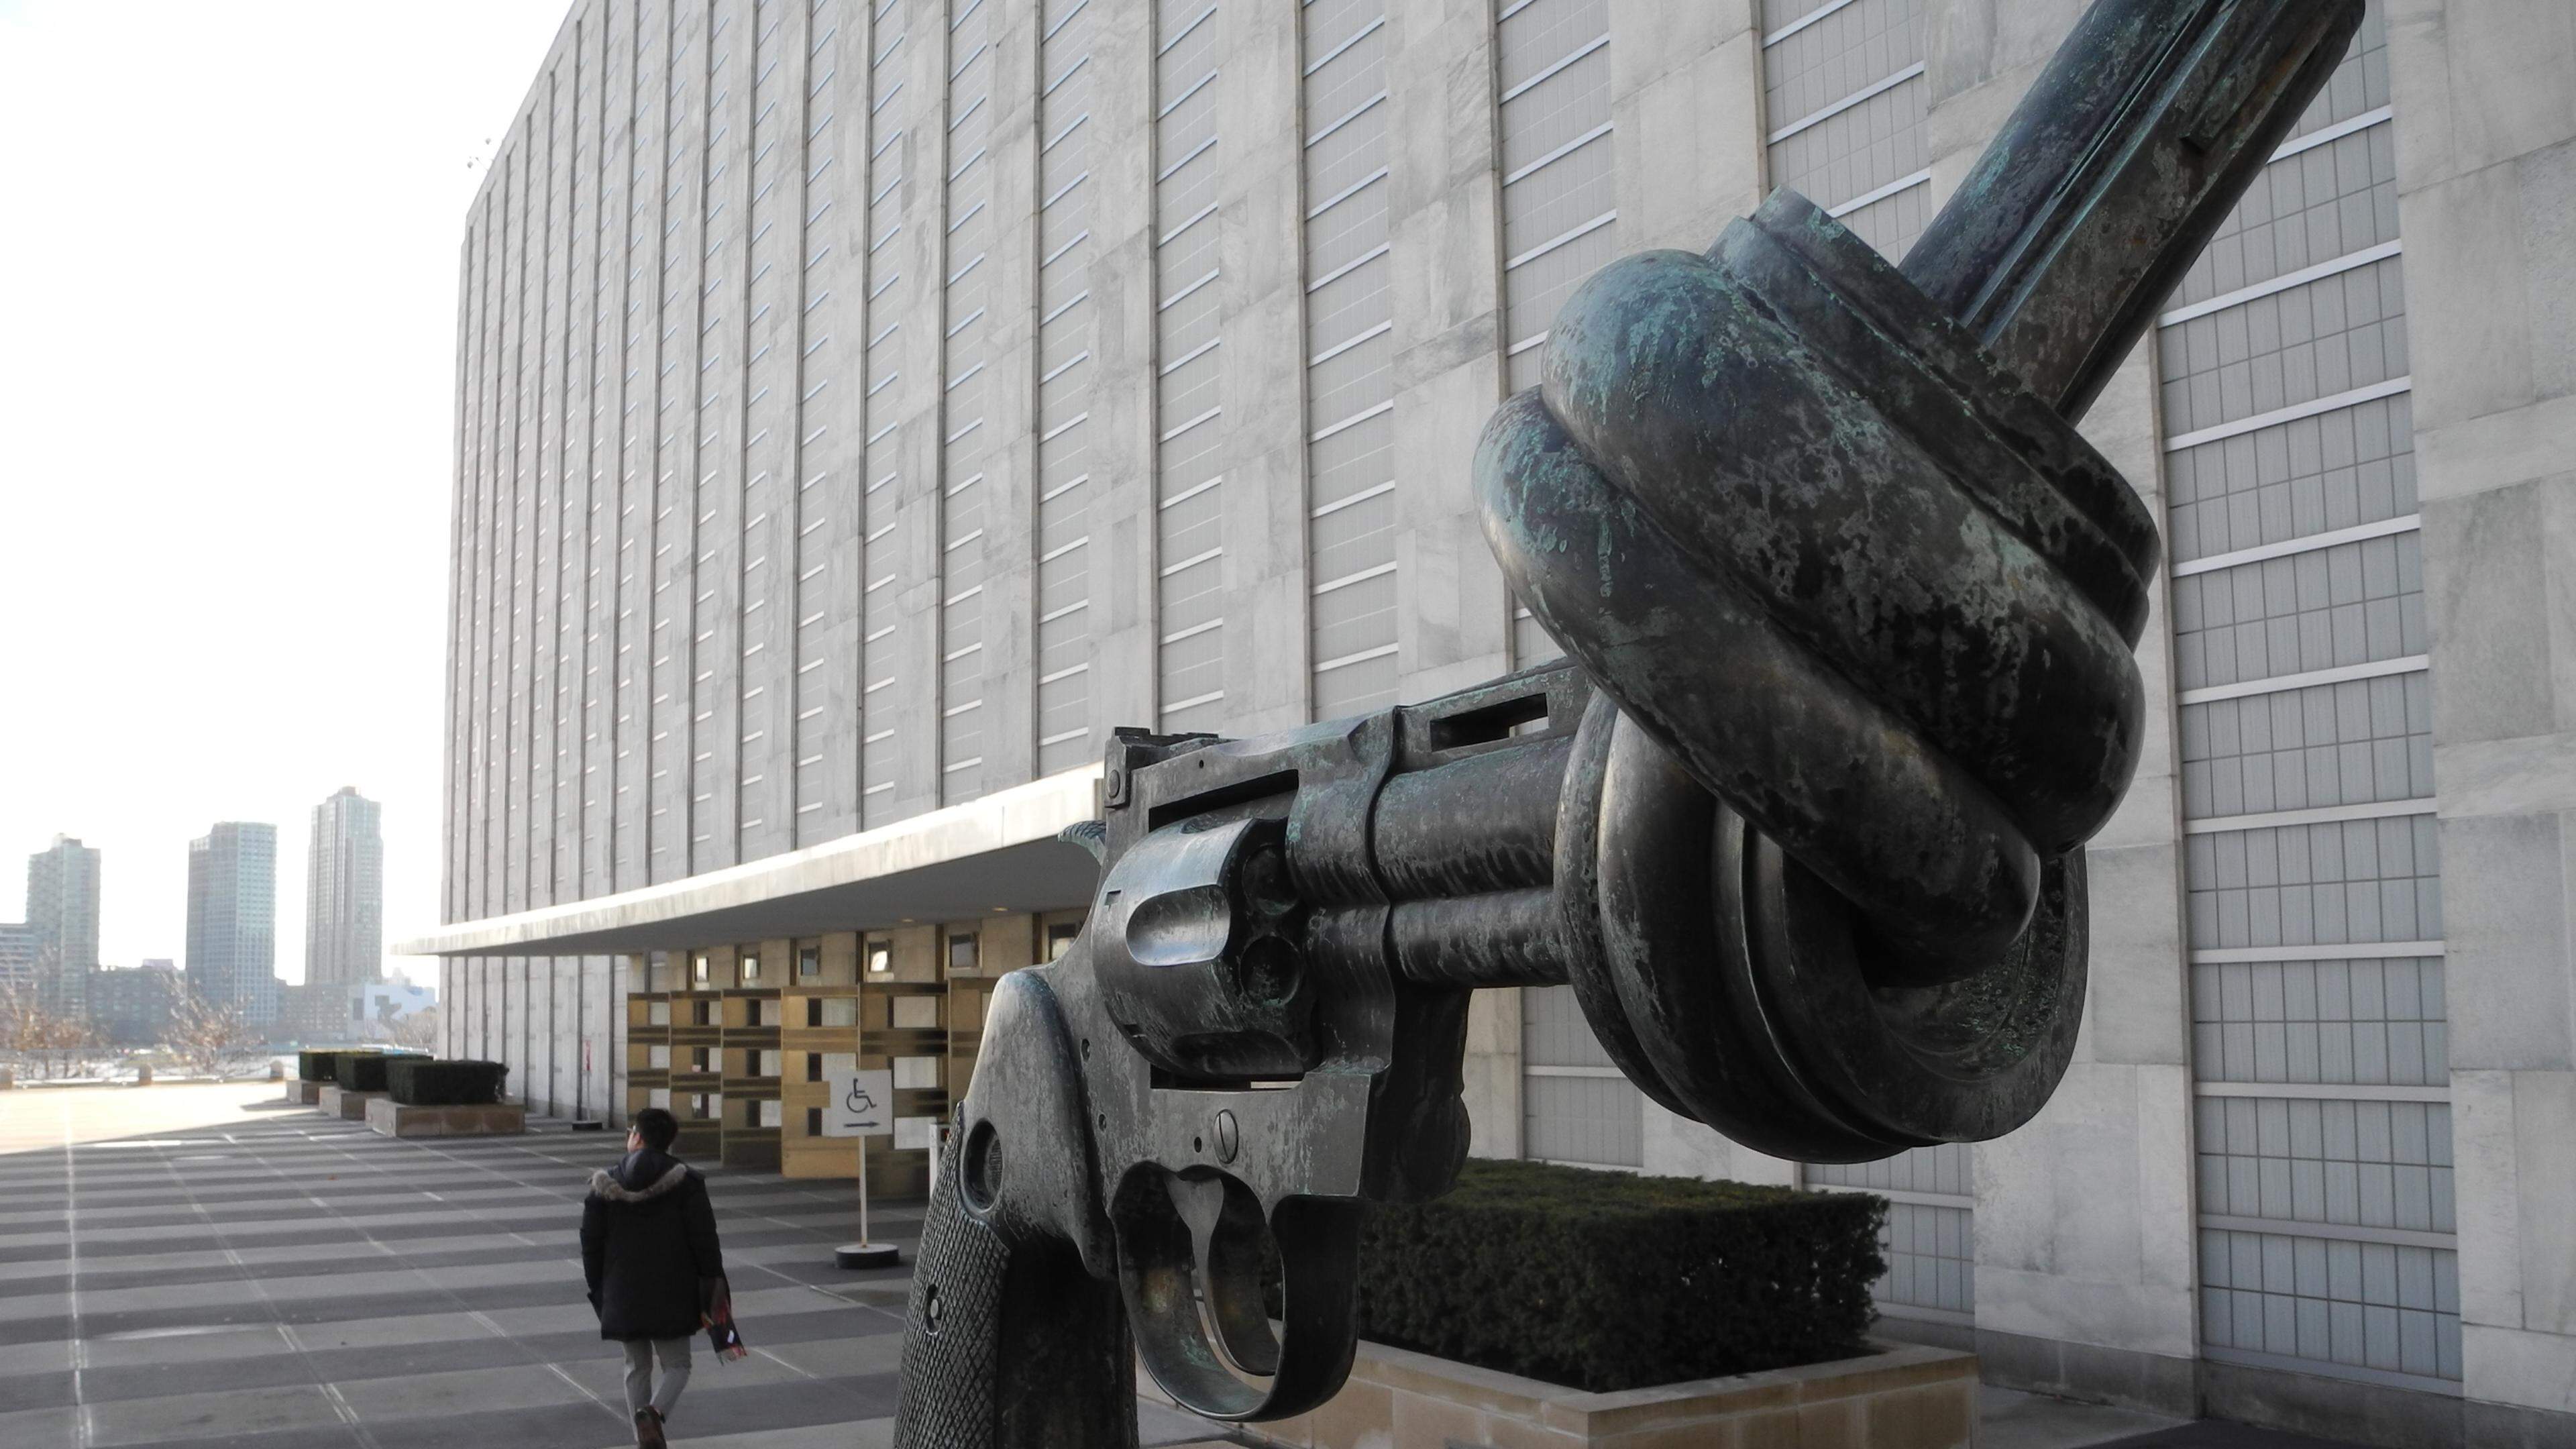 17 December 2018, US, New York: The headquarters of the United Nations in New York with the sculpture "Non Violence", also known as "The Knotted Gun", by the Swedish artist Carl Fredrik Reuterswärd. (to dpa "UN General Assembly votes on global refugee pact" on 17.12.2018) Photo: Johannes Schmitt-Tegge/dpa (Photo by Johannes Schmitt-Tegge/picture alliance via Getty Images)